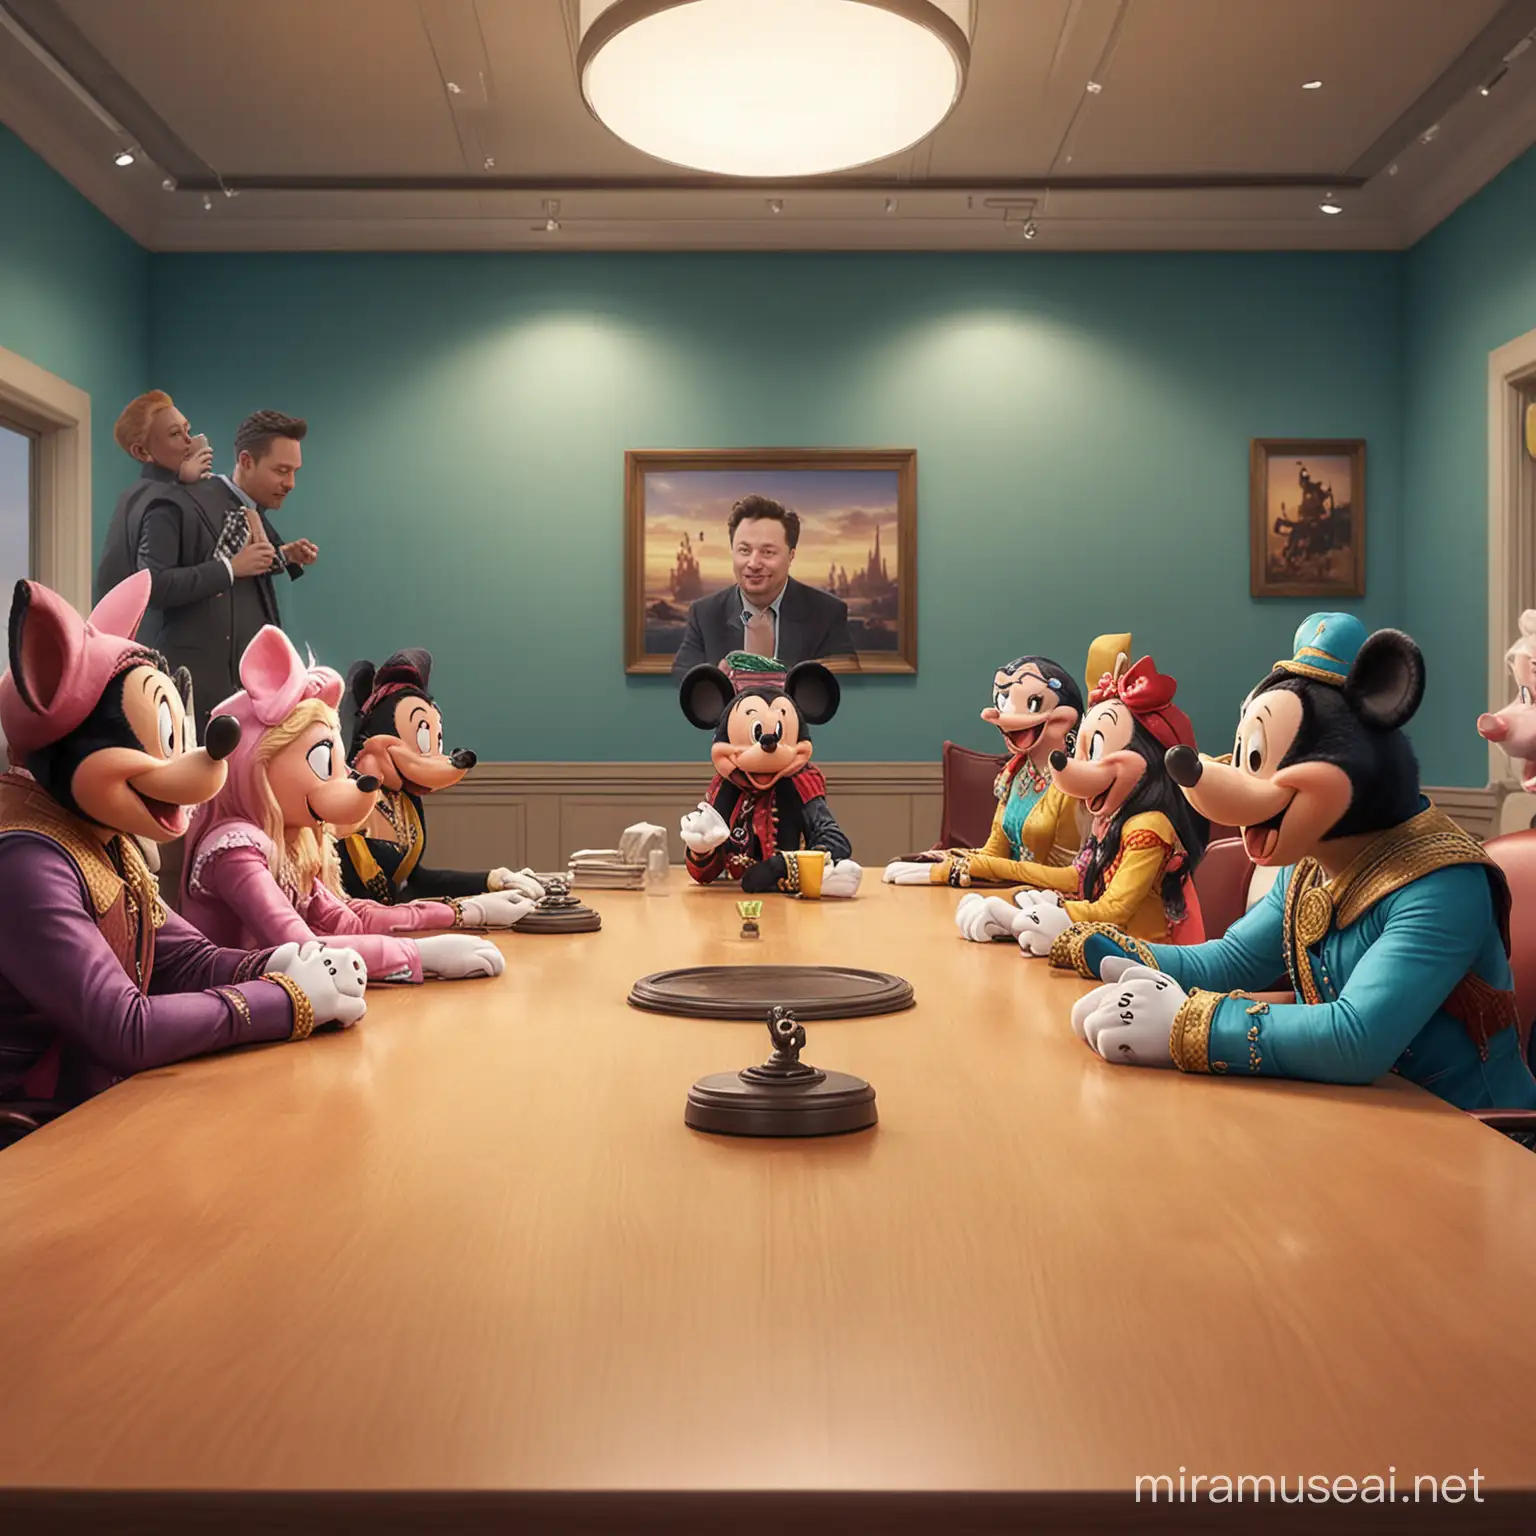 Elon Musk Meeting with Disney Characters in Vibrant Office Setting